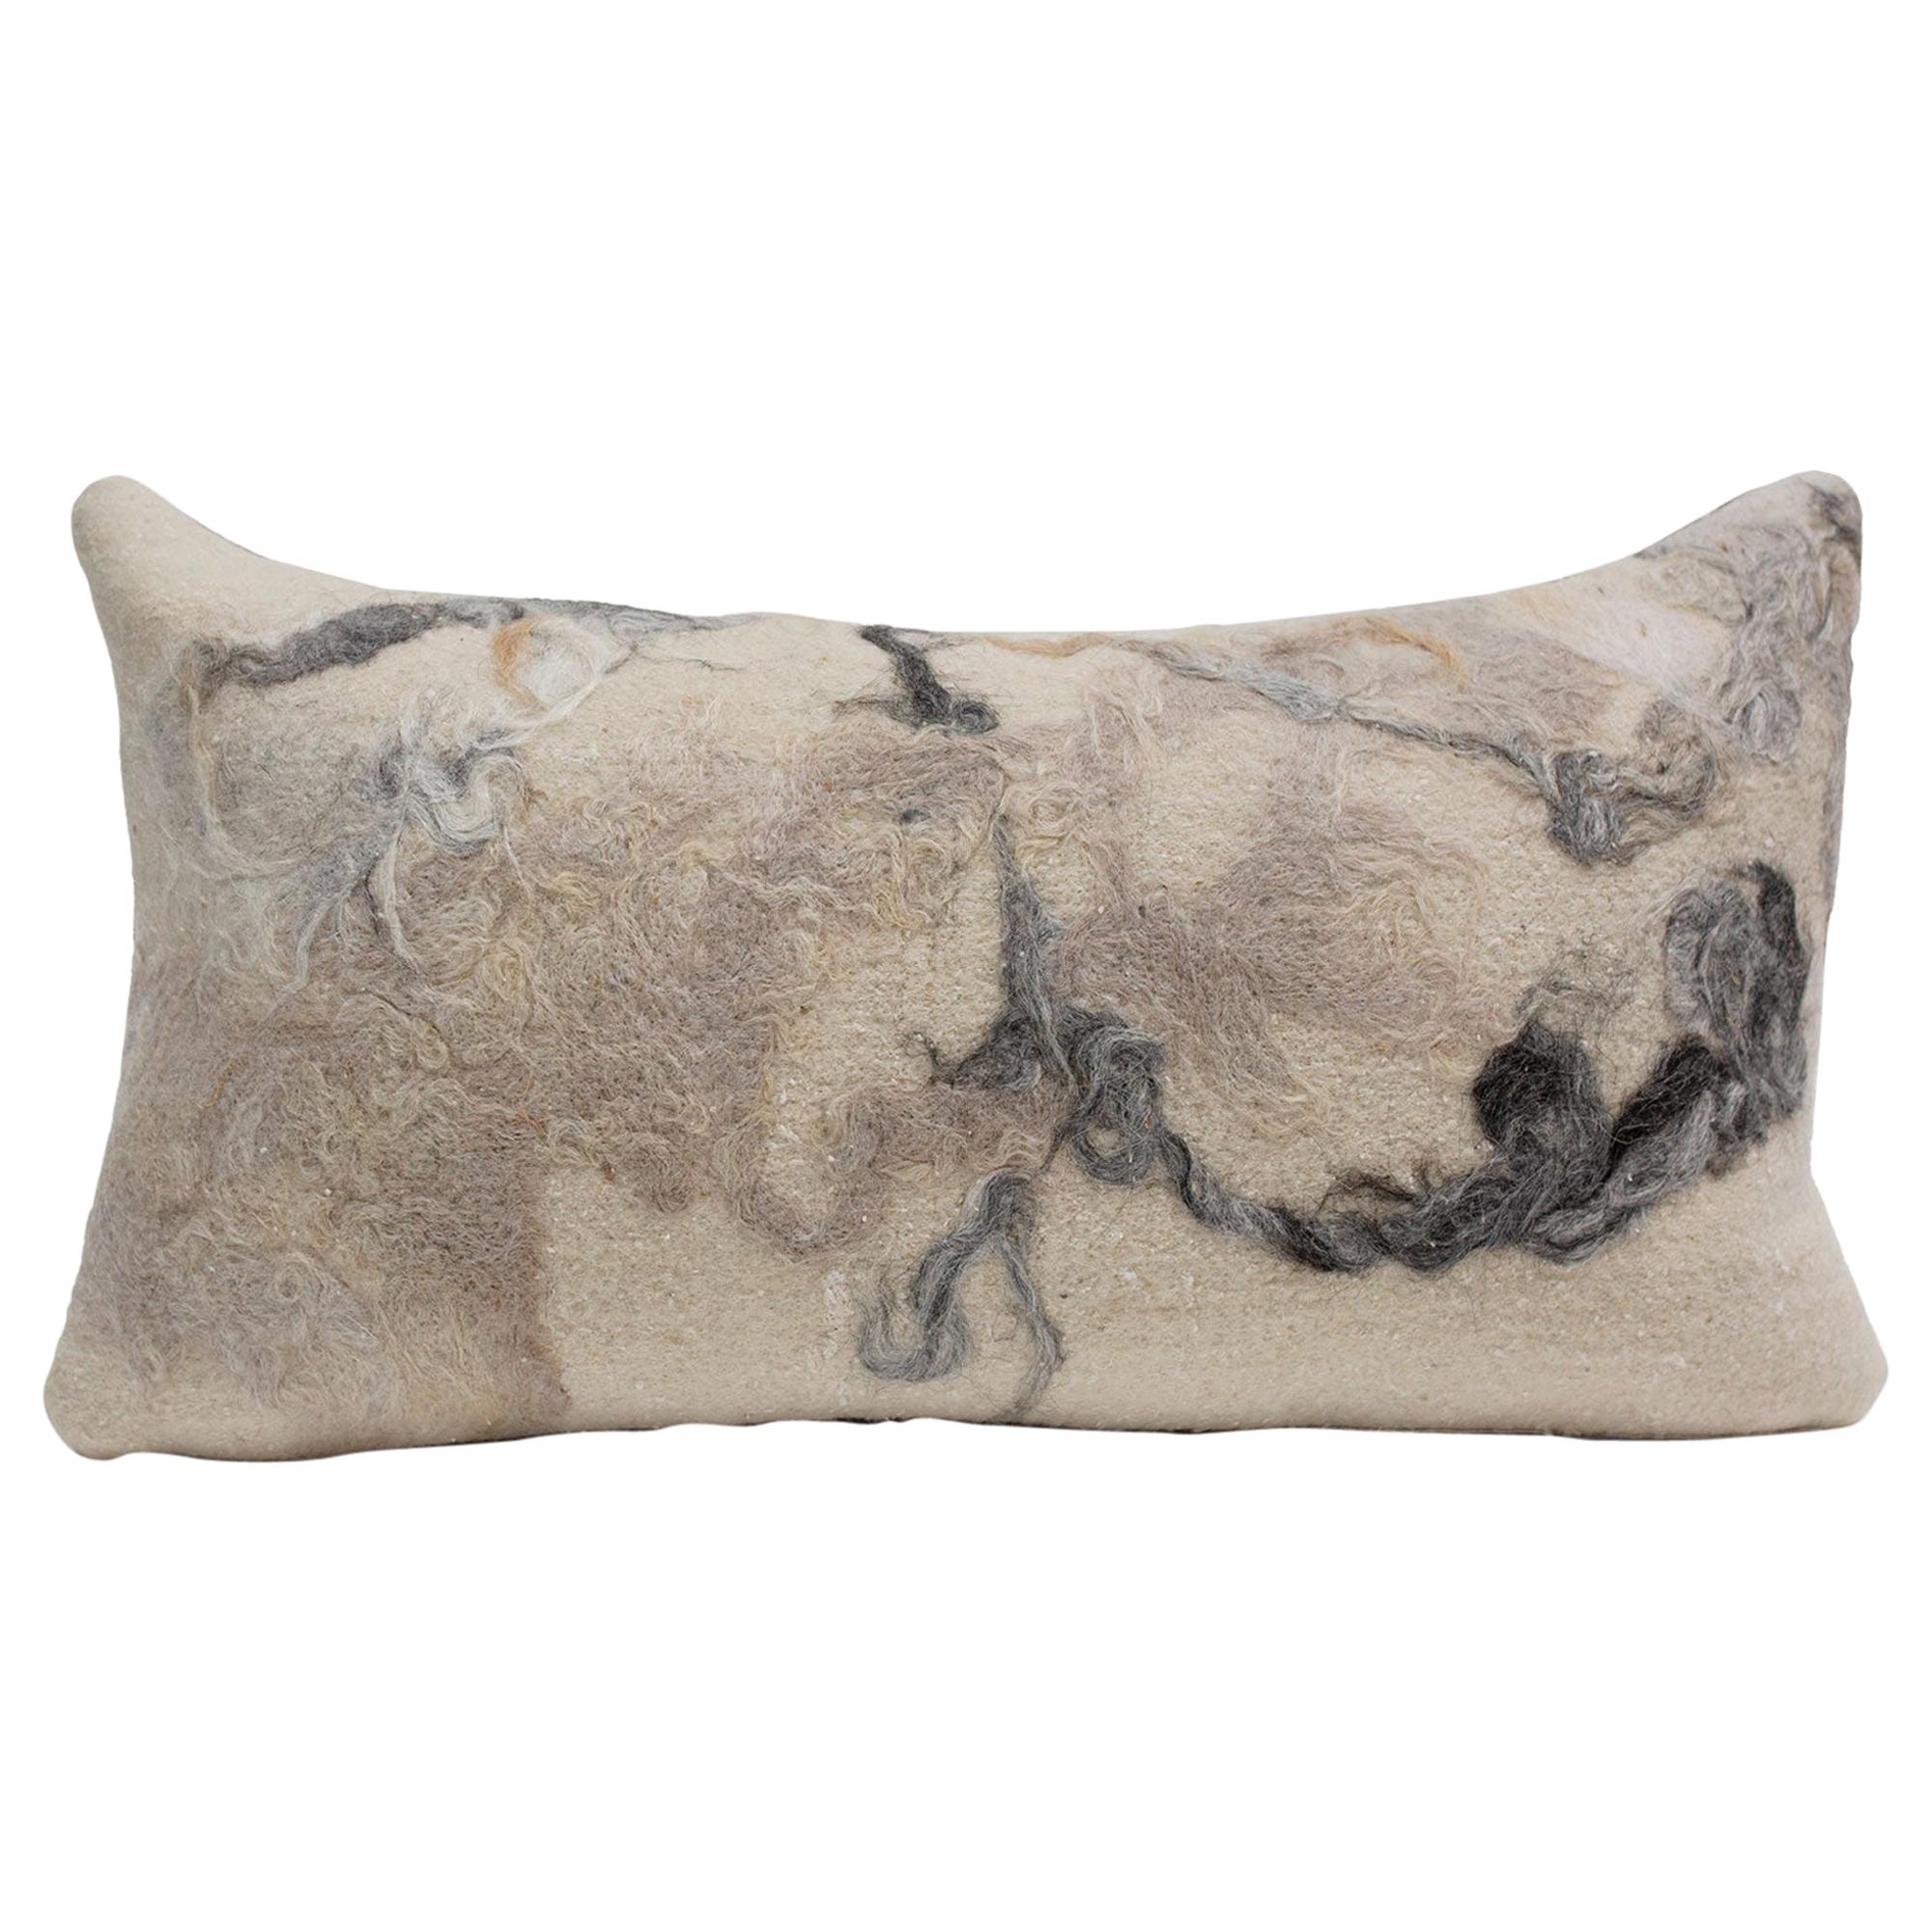 Hand-Crafted Silk & Wool Felted Pillow with Raw Cashmere by JG Switzer For Sale